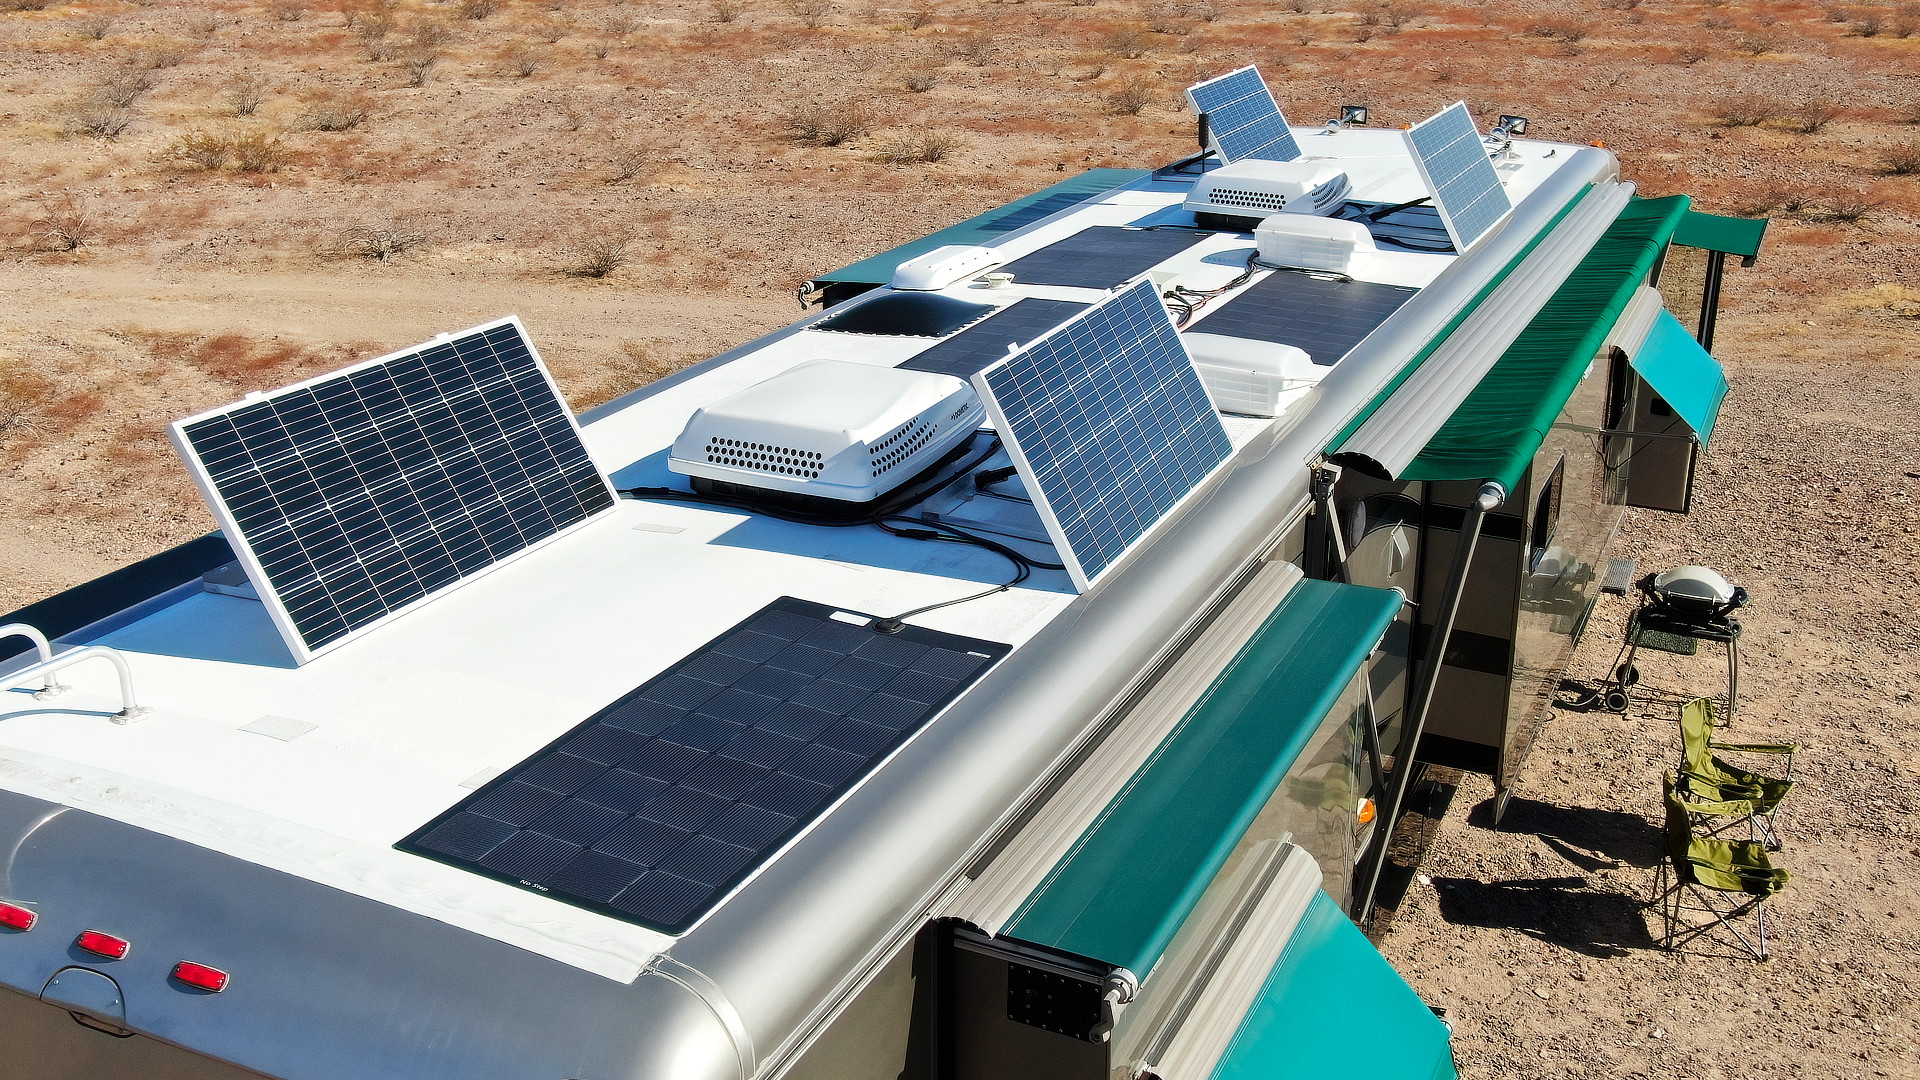 Photo of The RVgeeks' solar array powering the RV during an awesome boondocking experience, saving on our full-time RV living expenses